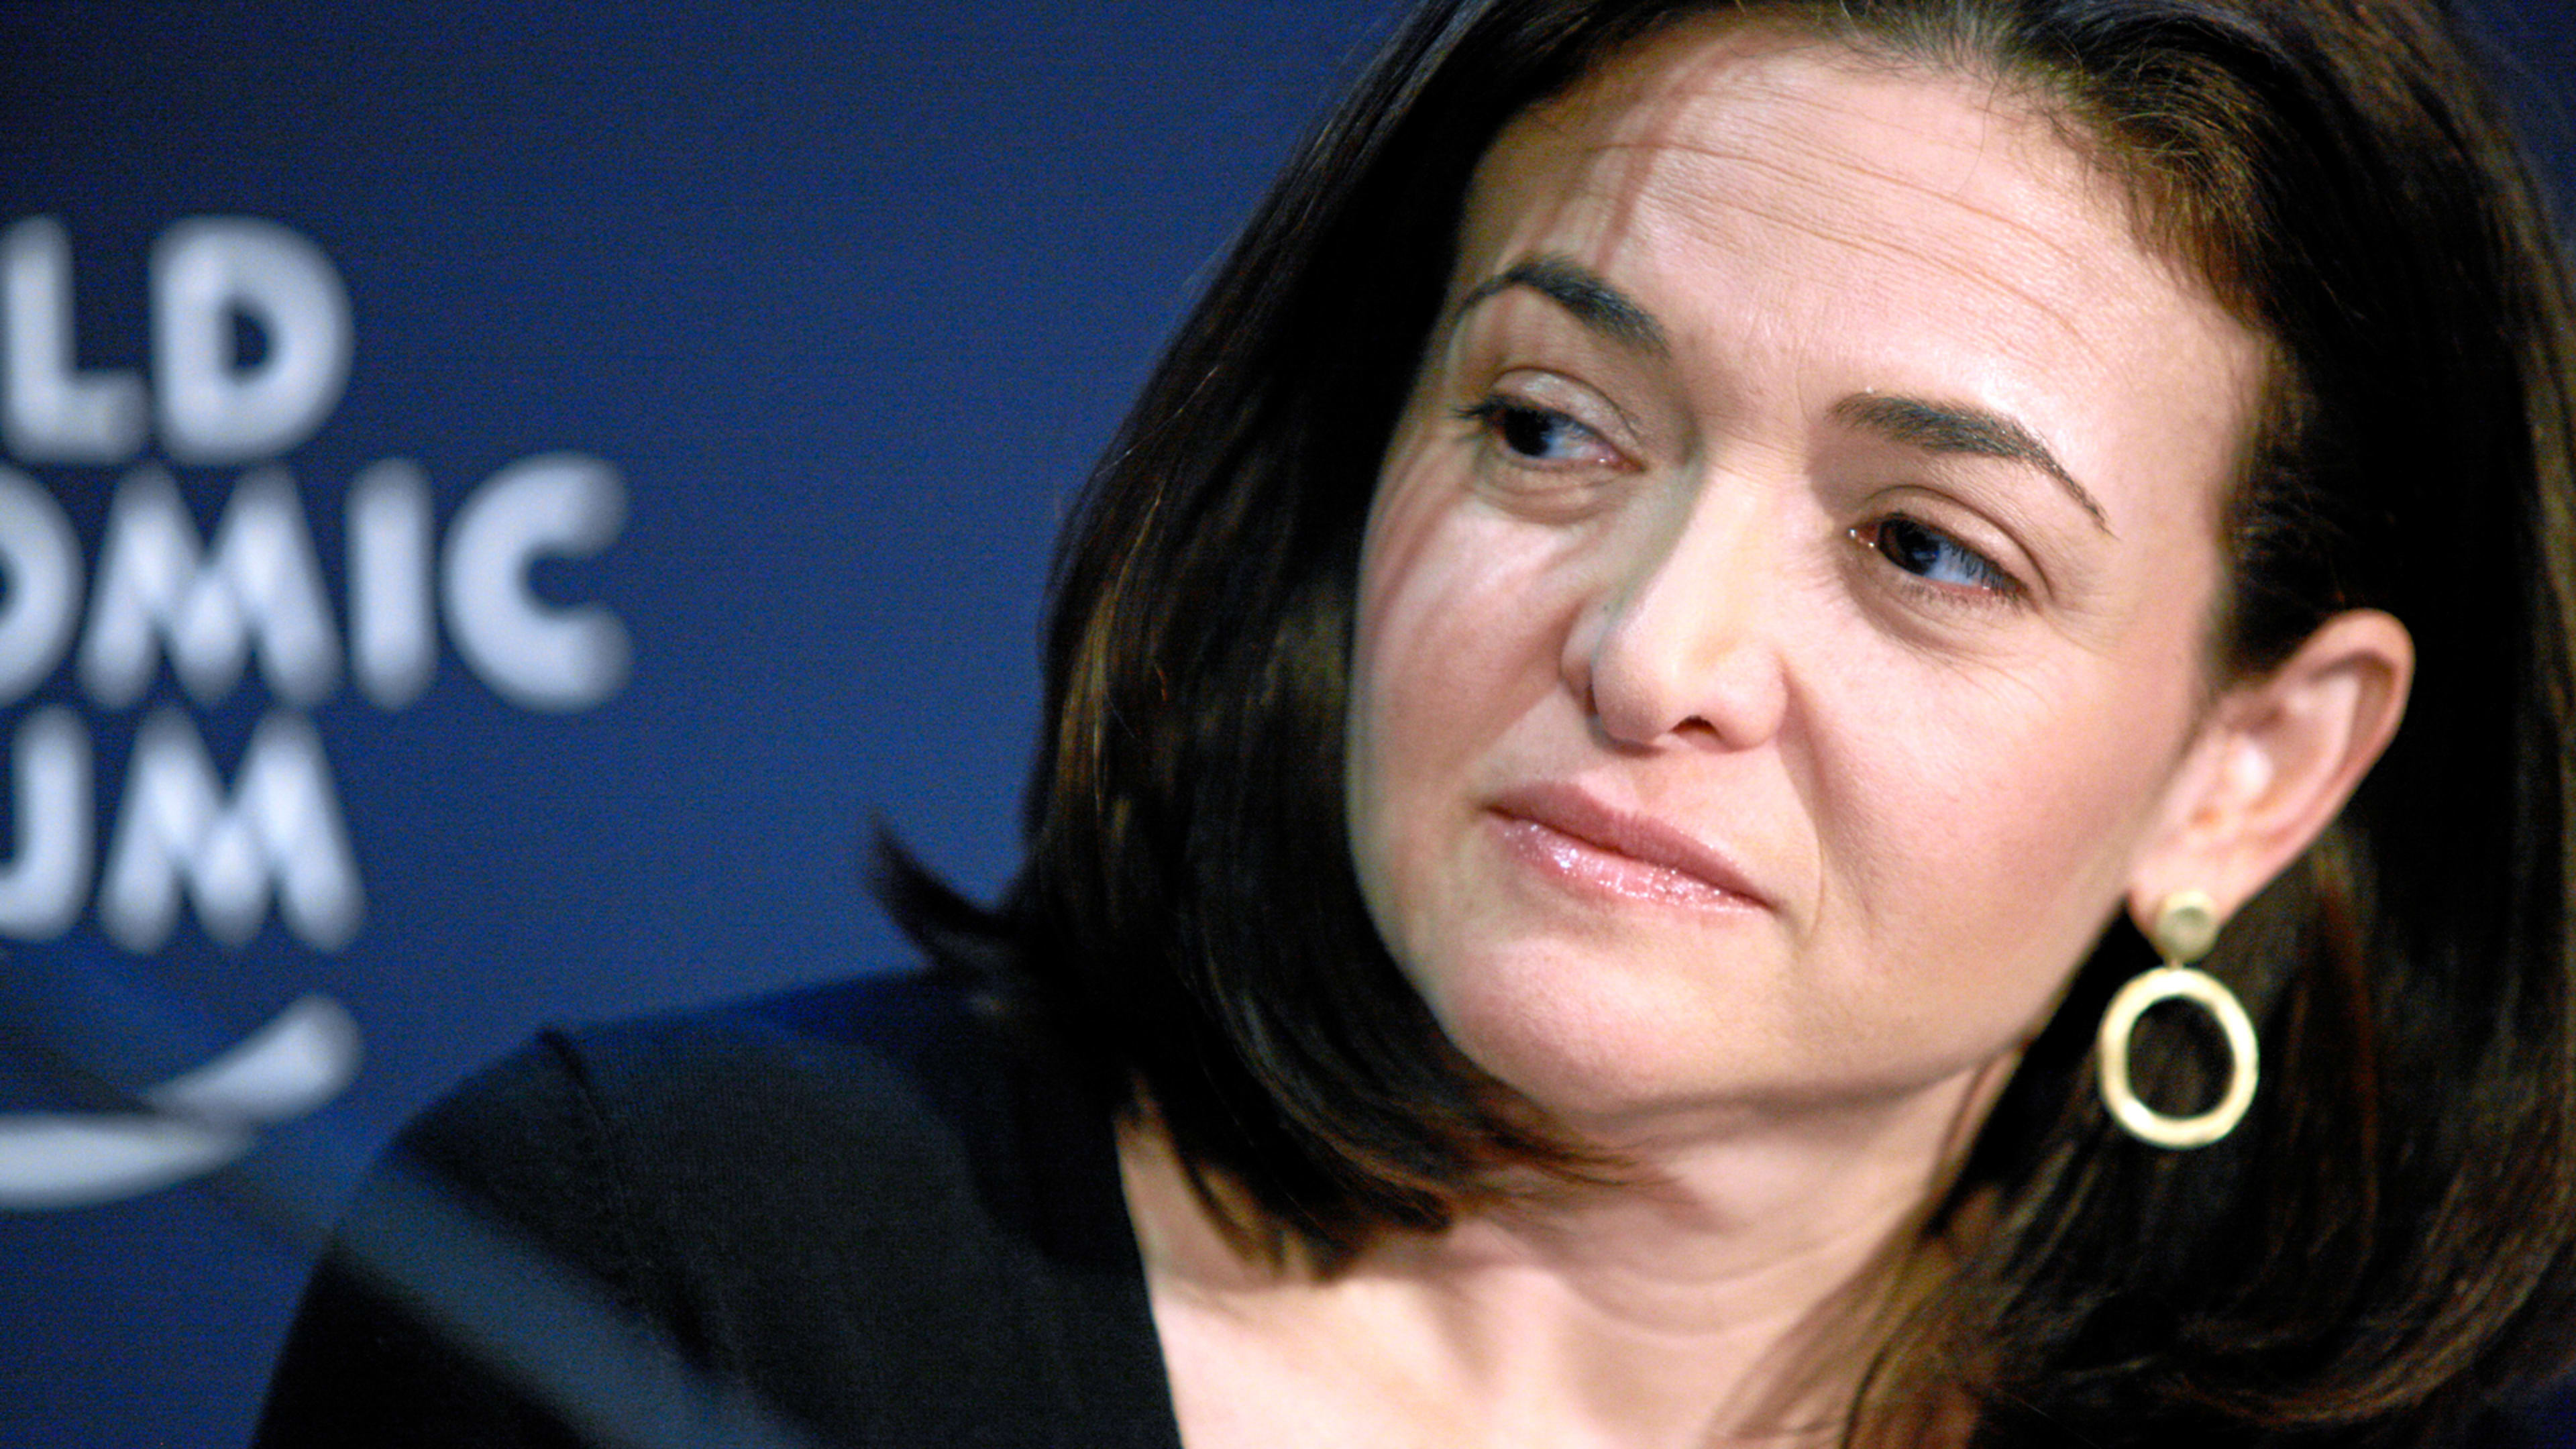 Sheryl Sandberg reportedly ordered oppo research on billionaire George Soros